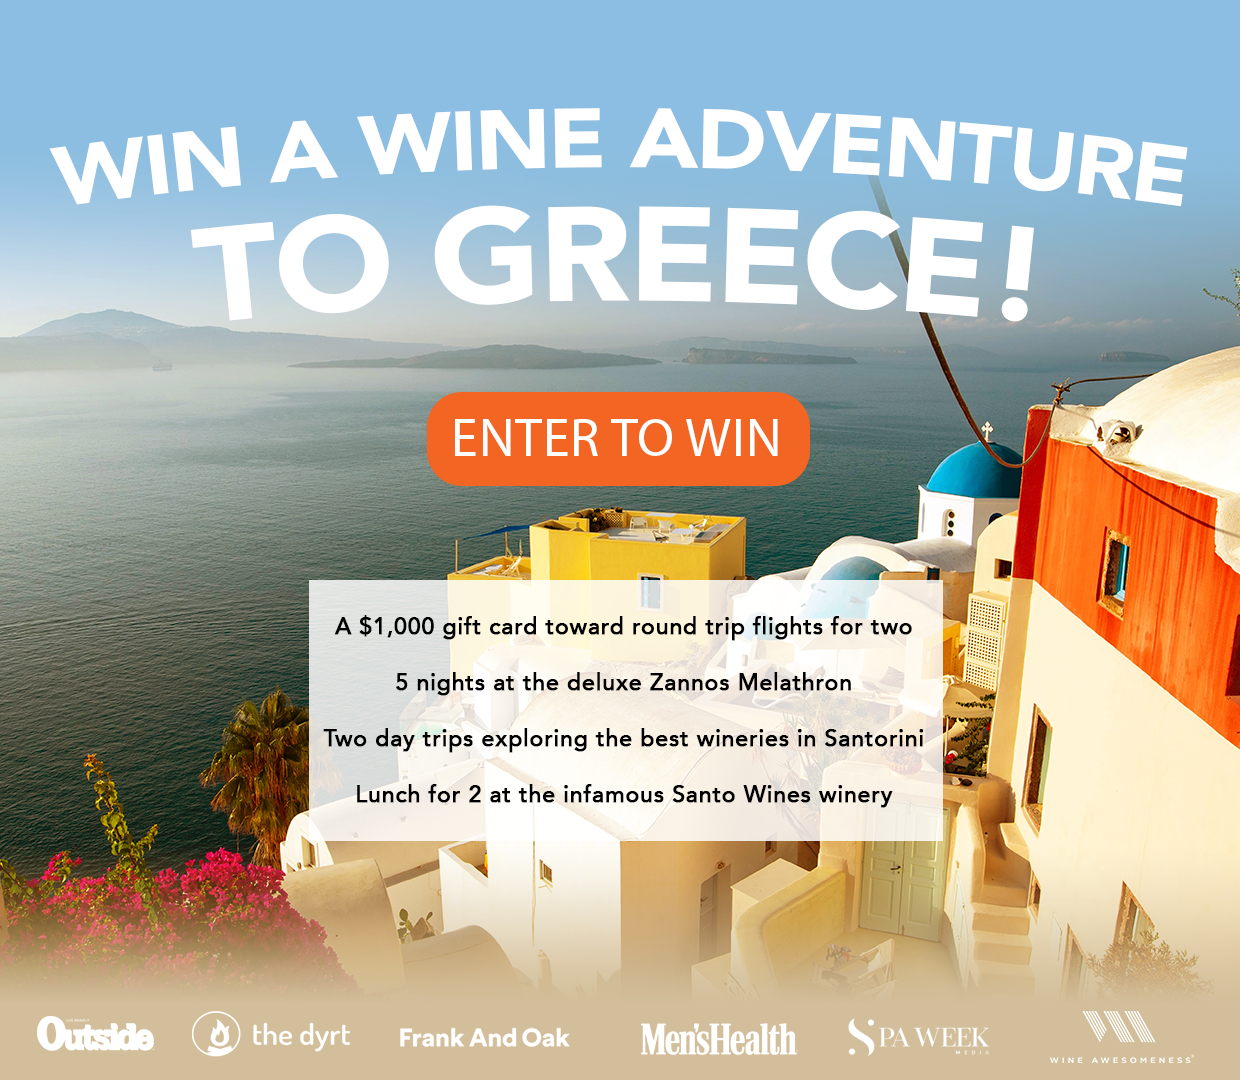 Enter for a chance to win the an amazing adventure exploring the Greek Isles and some of the world's best wine!